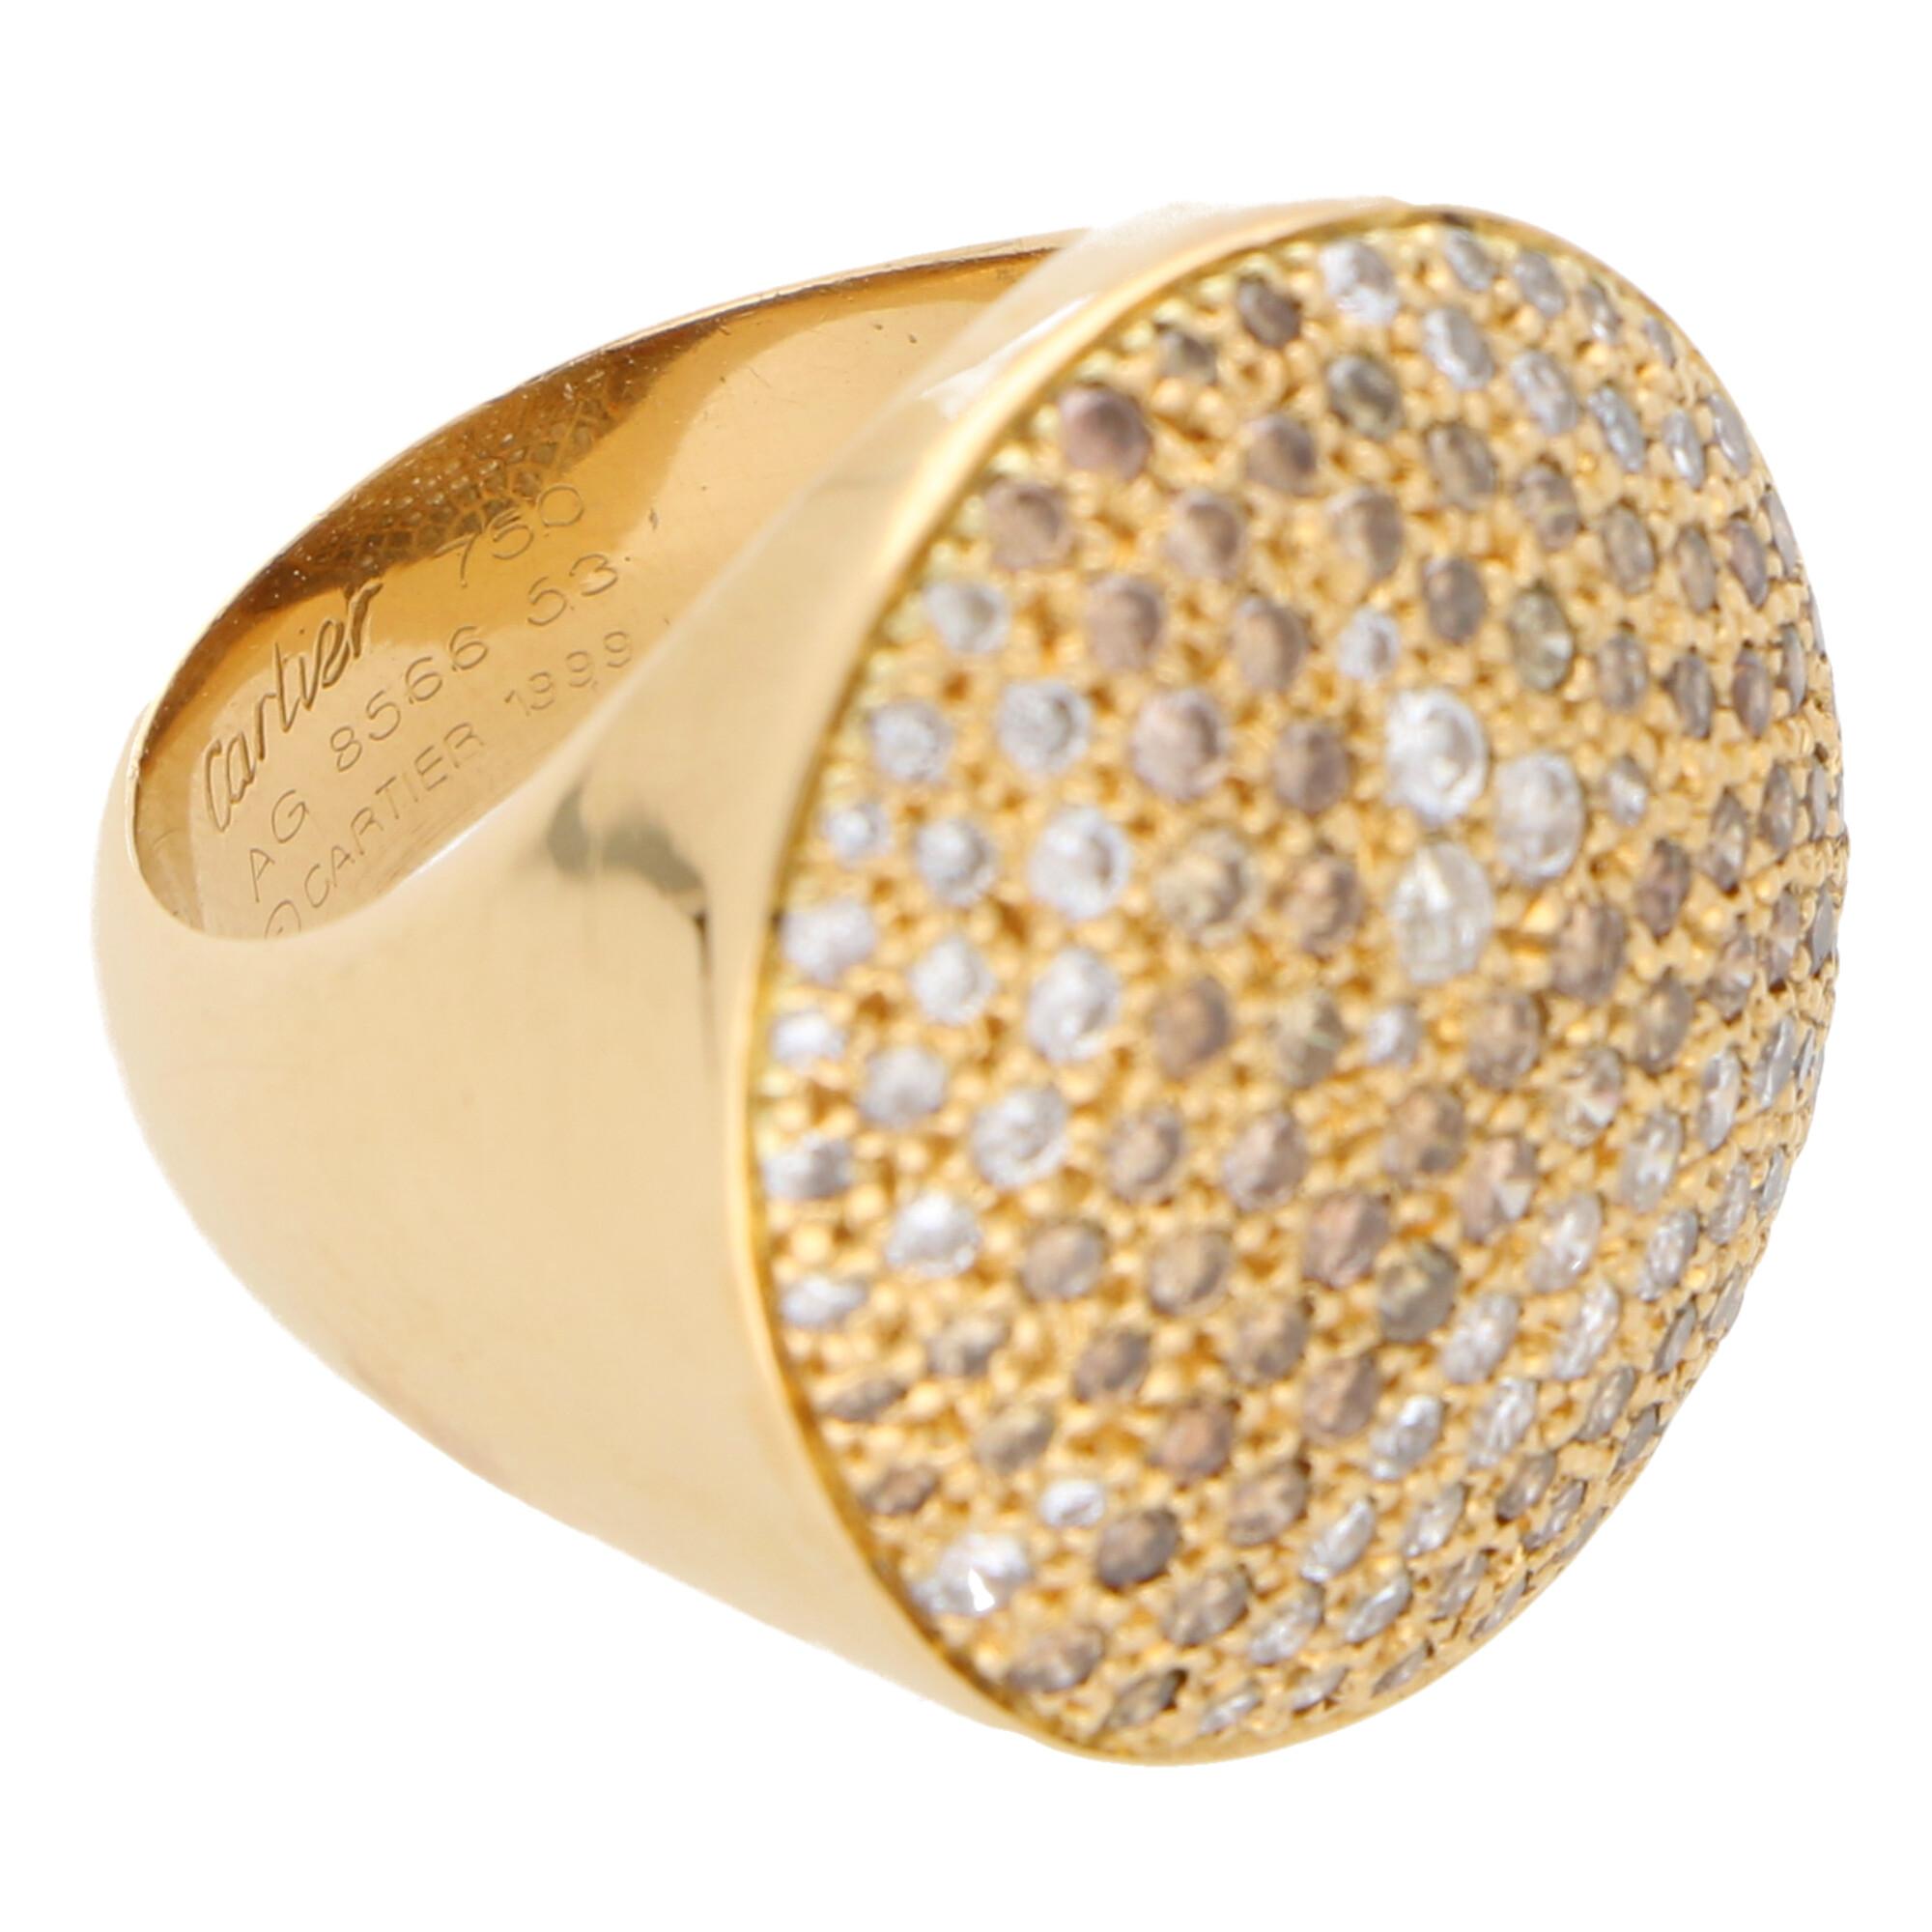 Women's or Men's Vintage Cartier Jeton Sauvage White and Cognac Diamond Cocktail Ring in 18k Gold